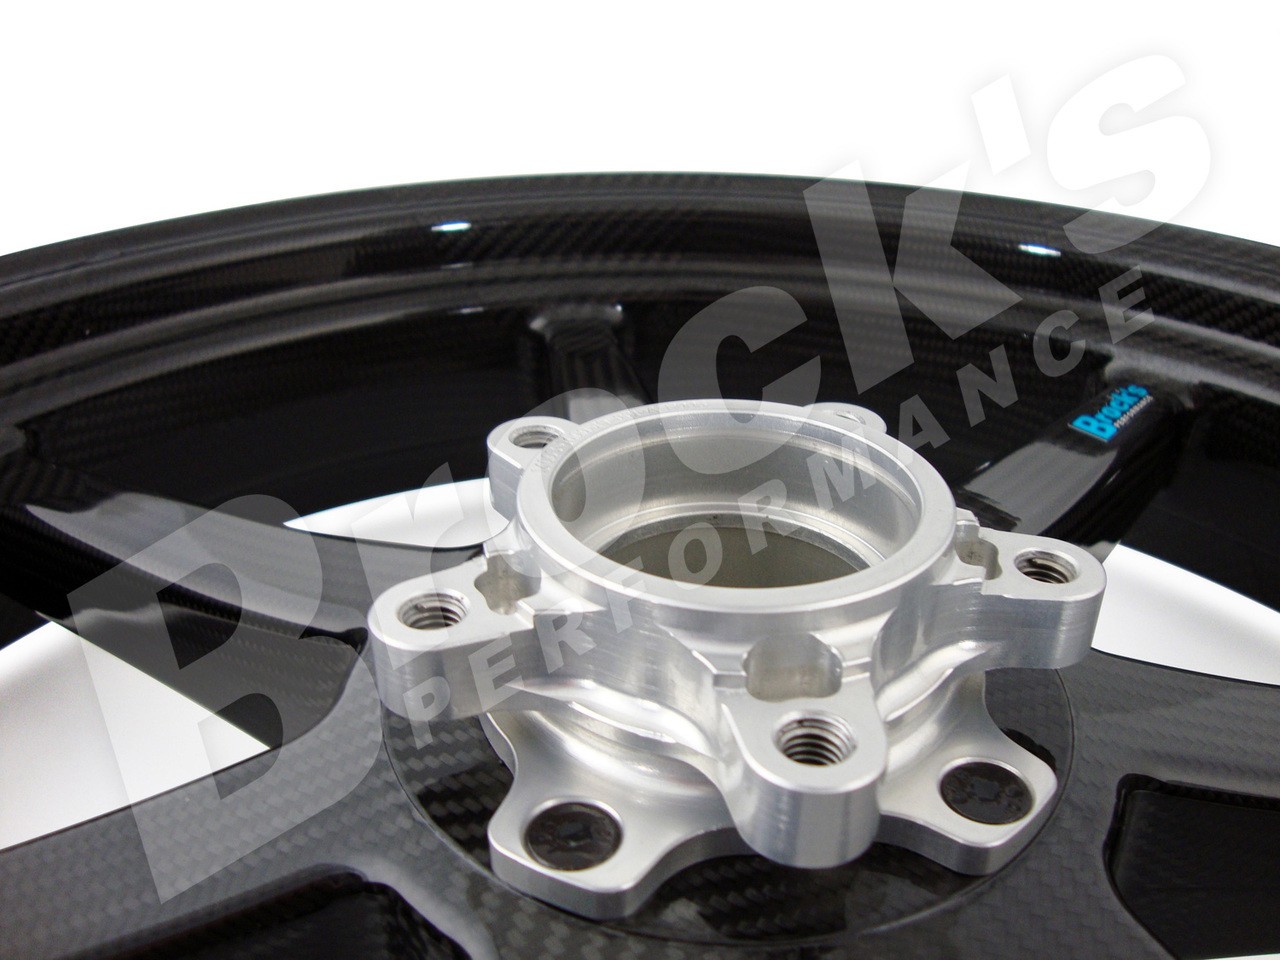 BST Panther TEK 17 x 3.5 Front Wheel - BMW R1200 S/R/RT (05-13) and GS/GS Adventure (04-12)